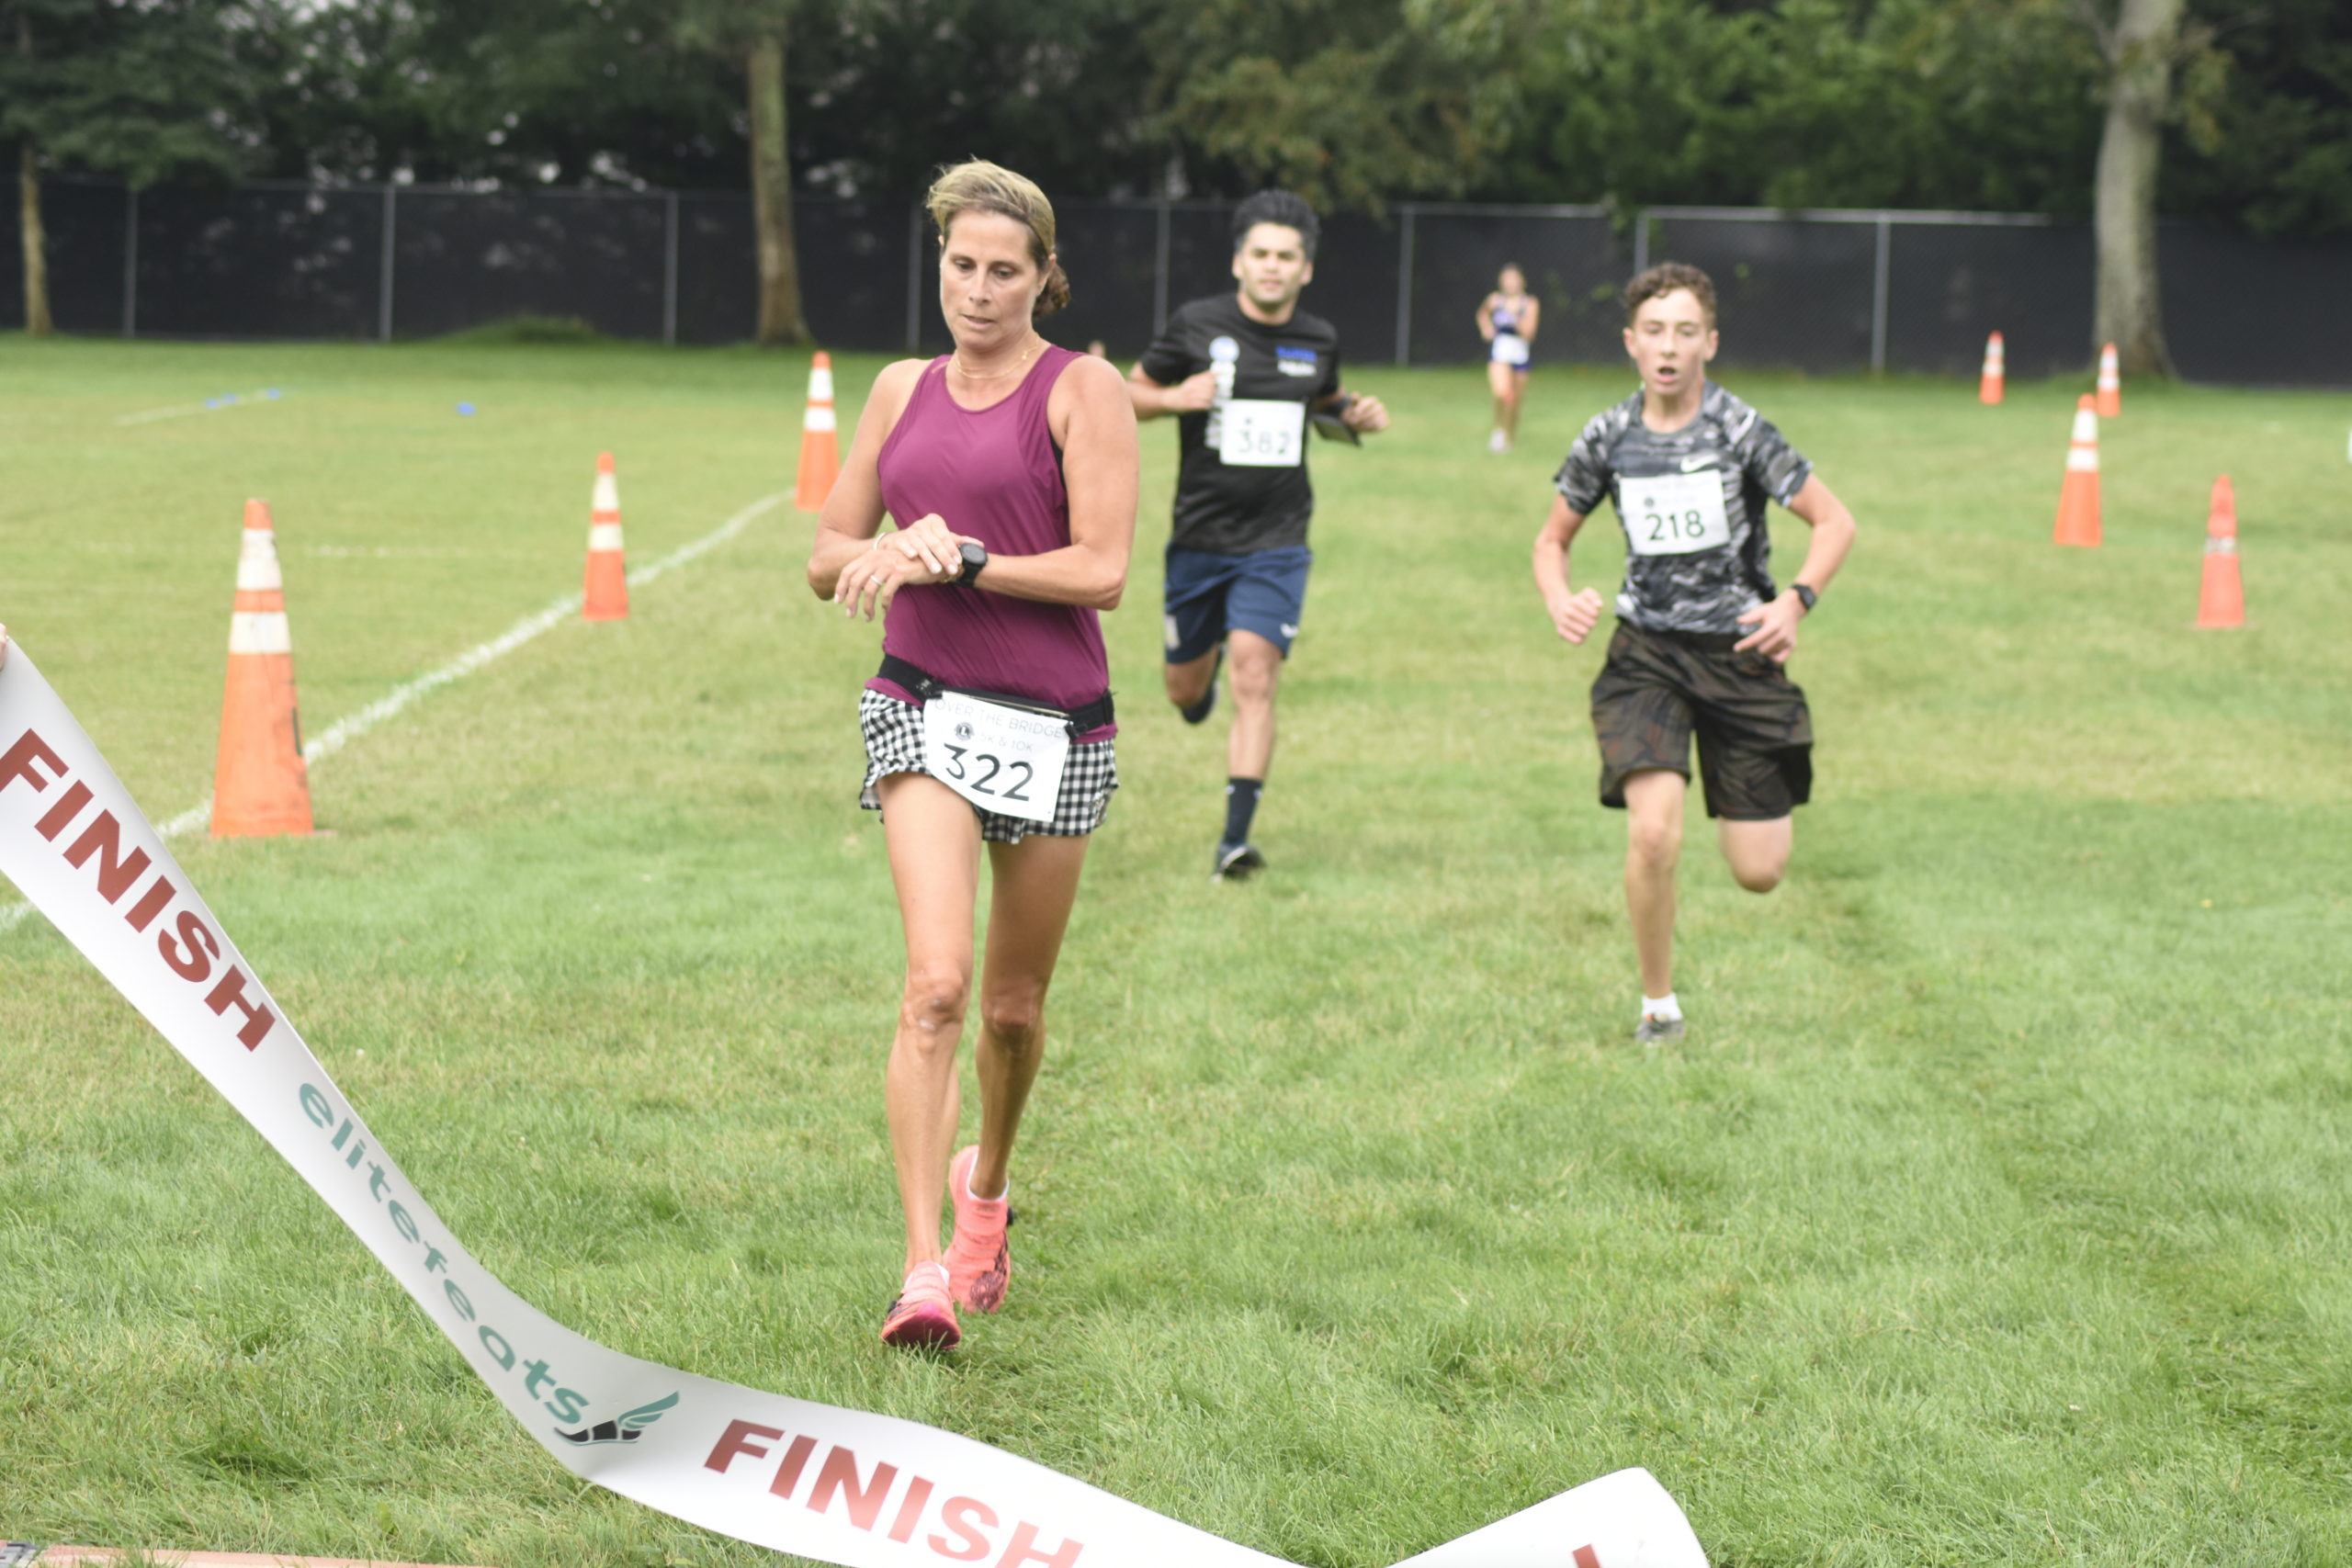 Julie Tucker of Hampton Bays was the female champion of the 5K.